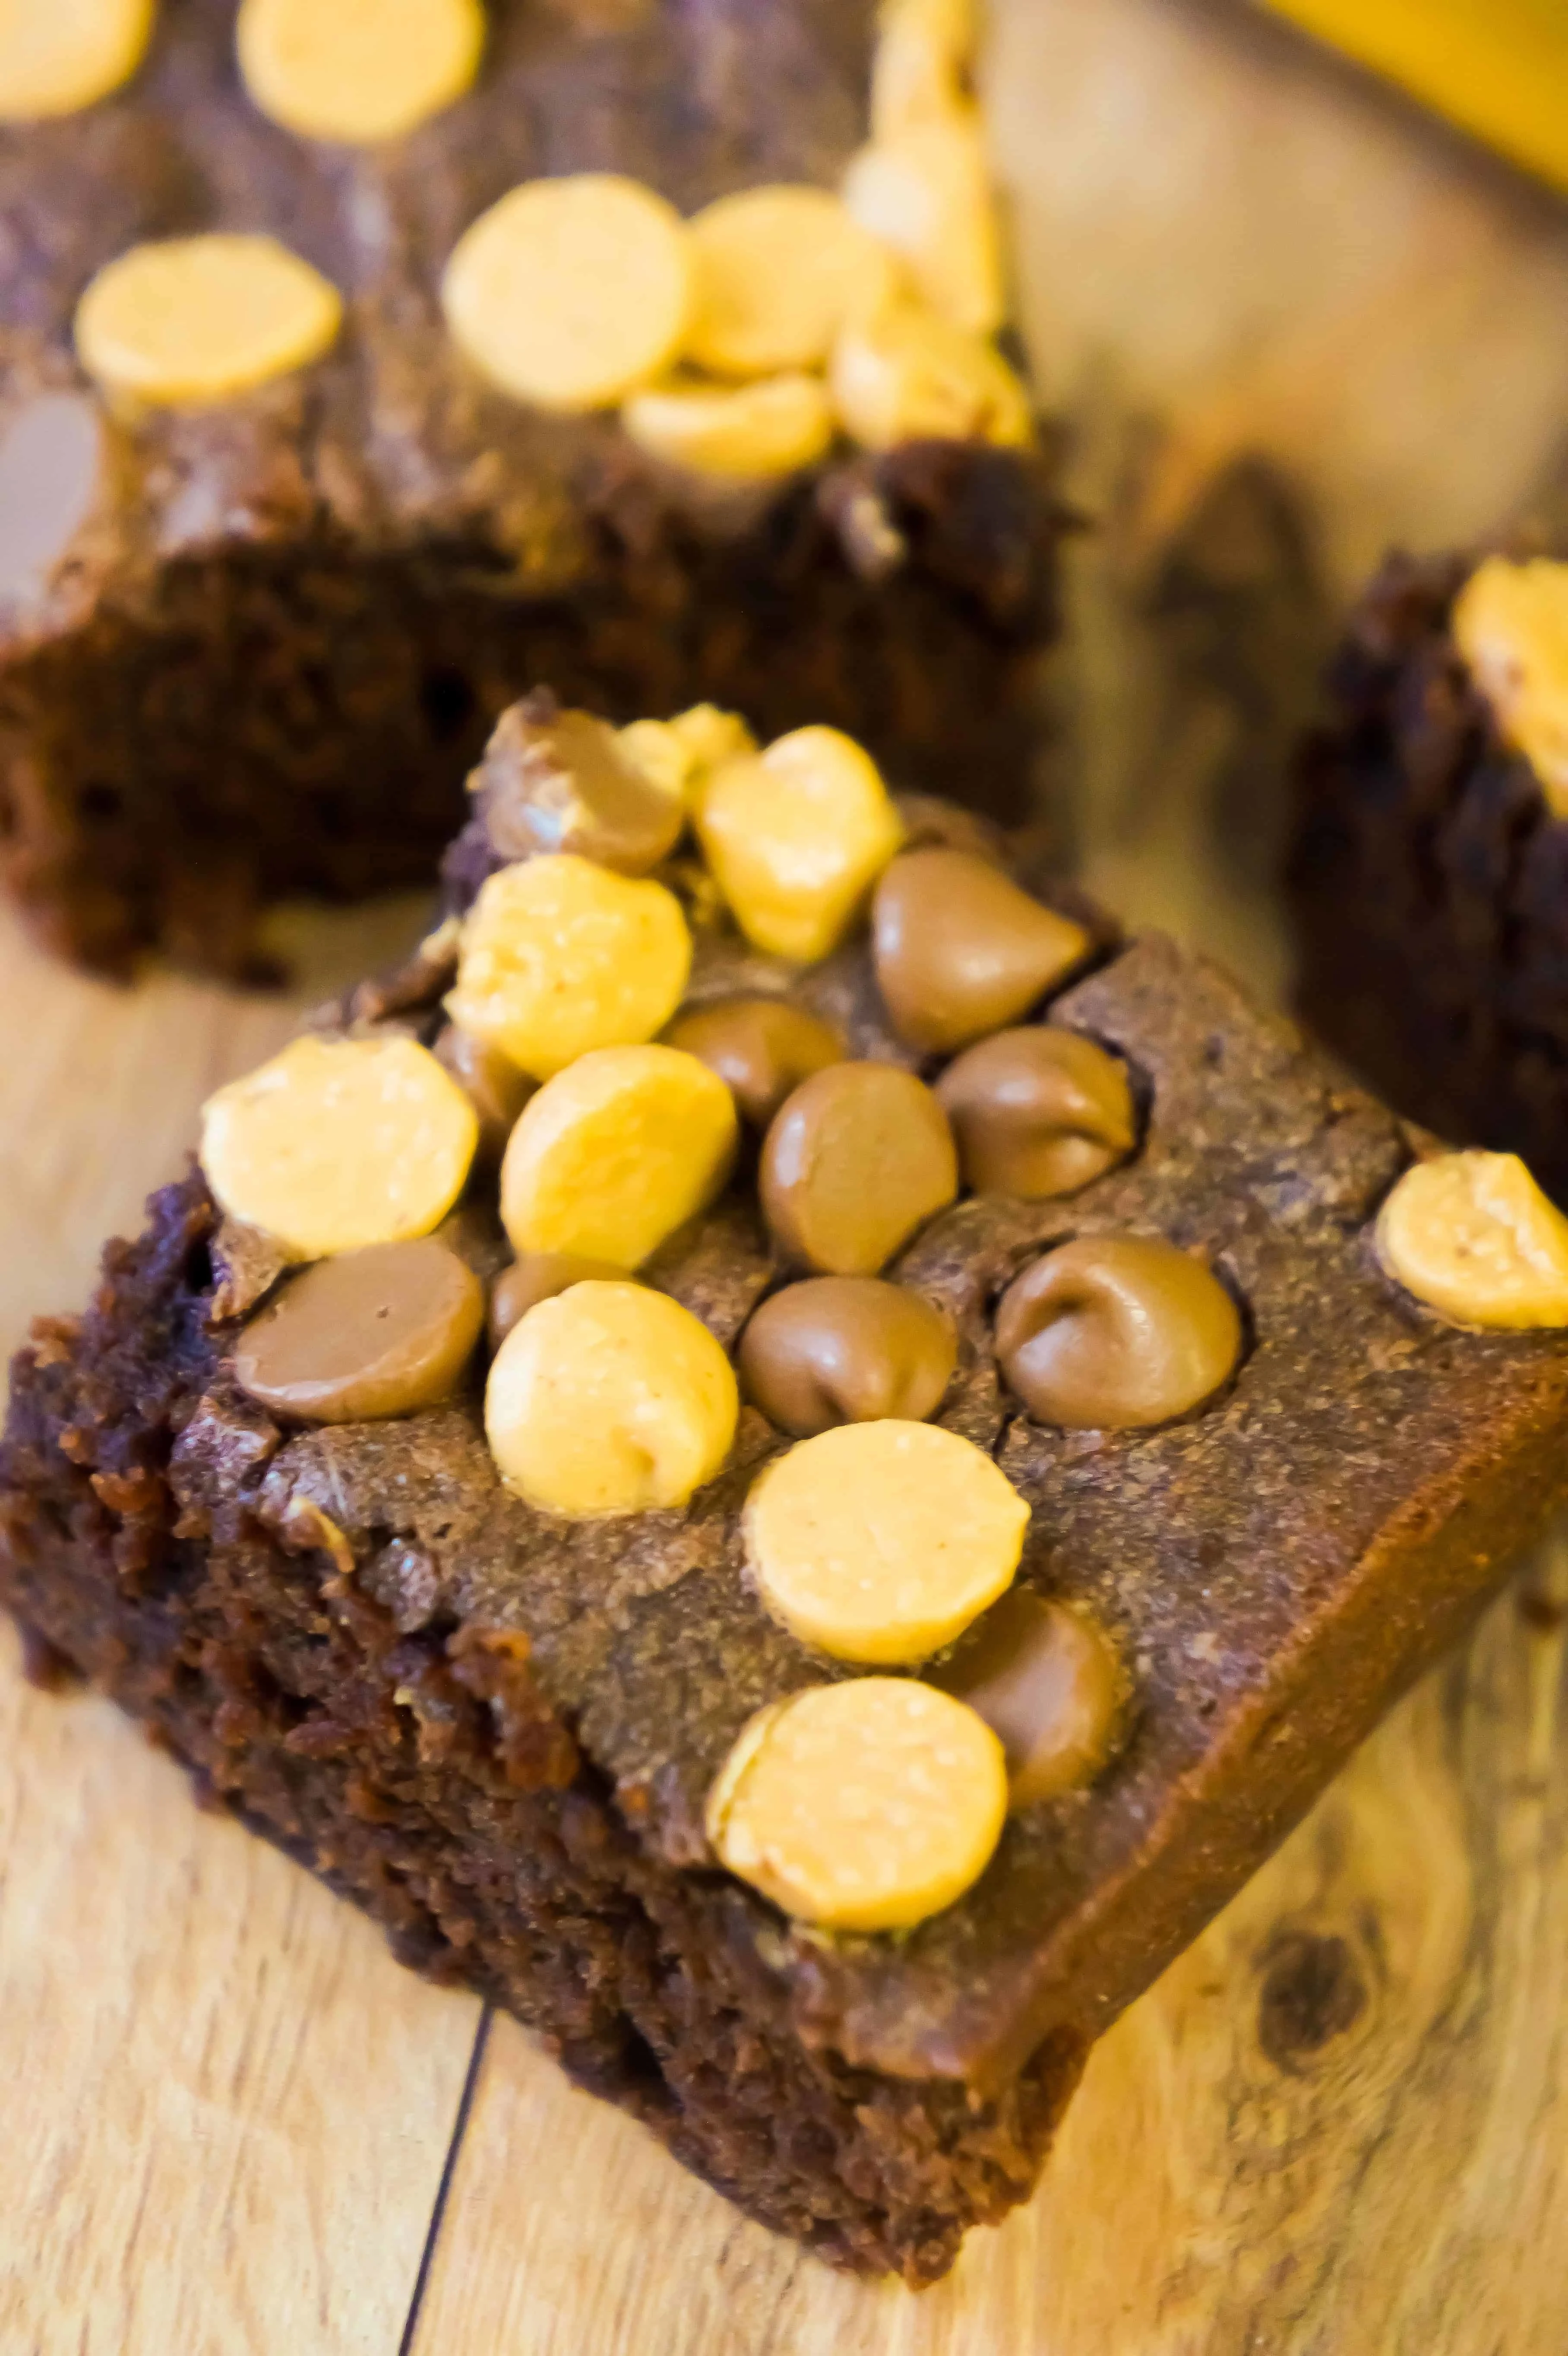 Peanut Butter Banana Brownies are an easy dessert recipe loaded with peanut butter and chocolate chips.